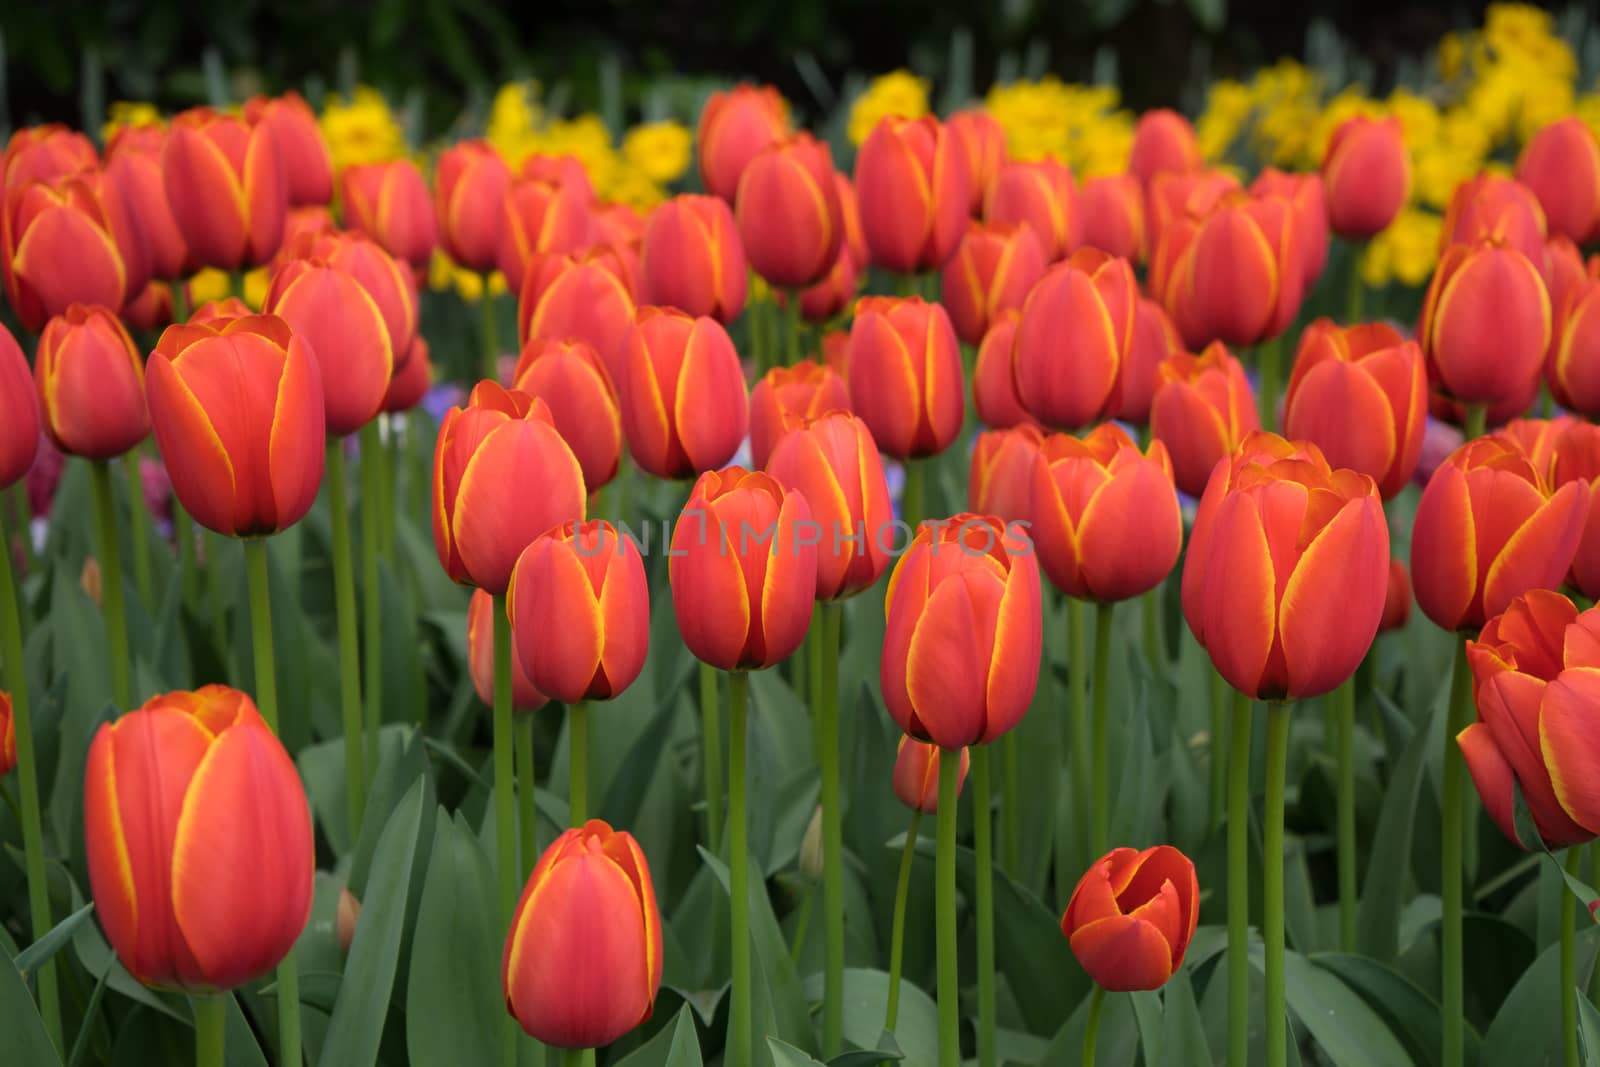 Fresh Bright red tulips with a tinge of yellow  in Lisse, Keuken by ramana16